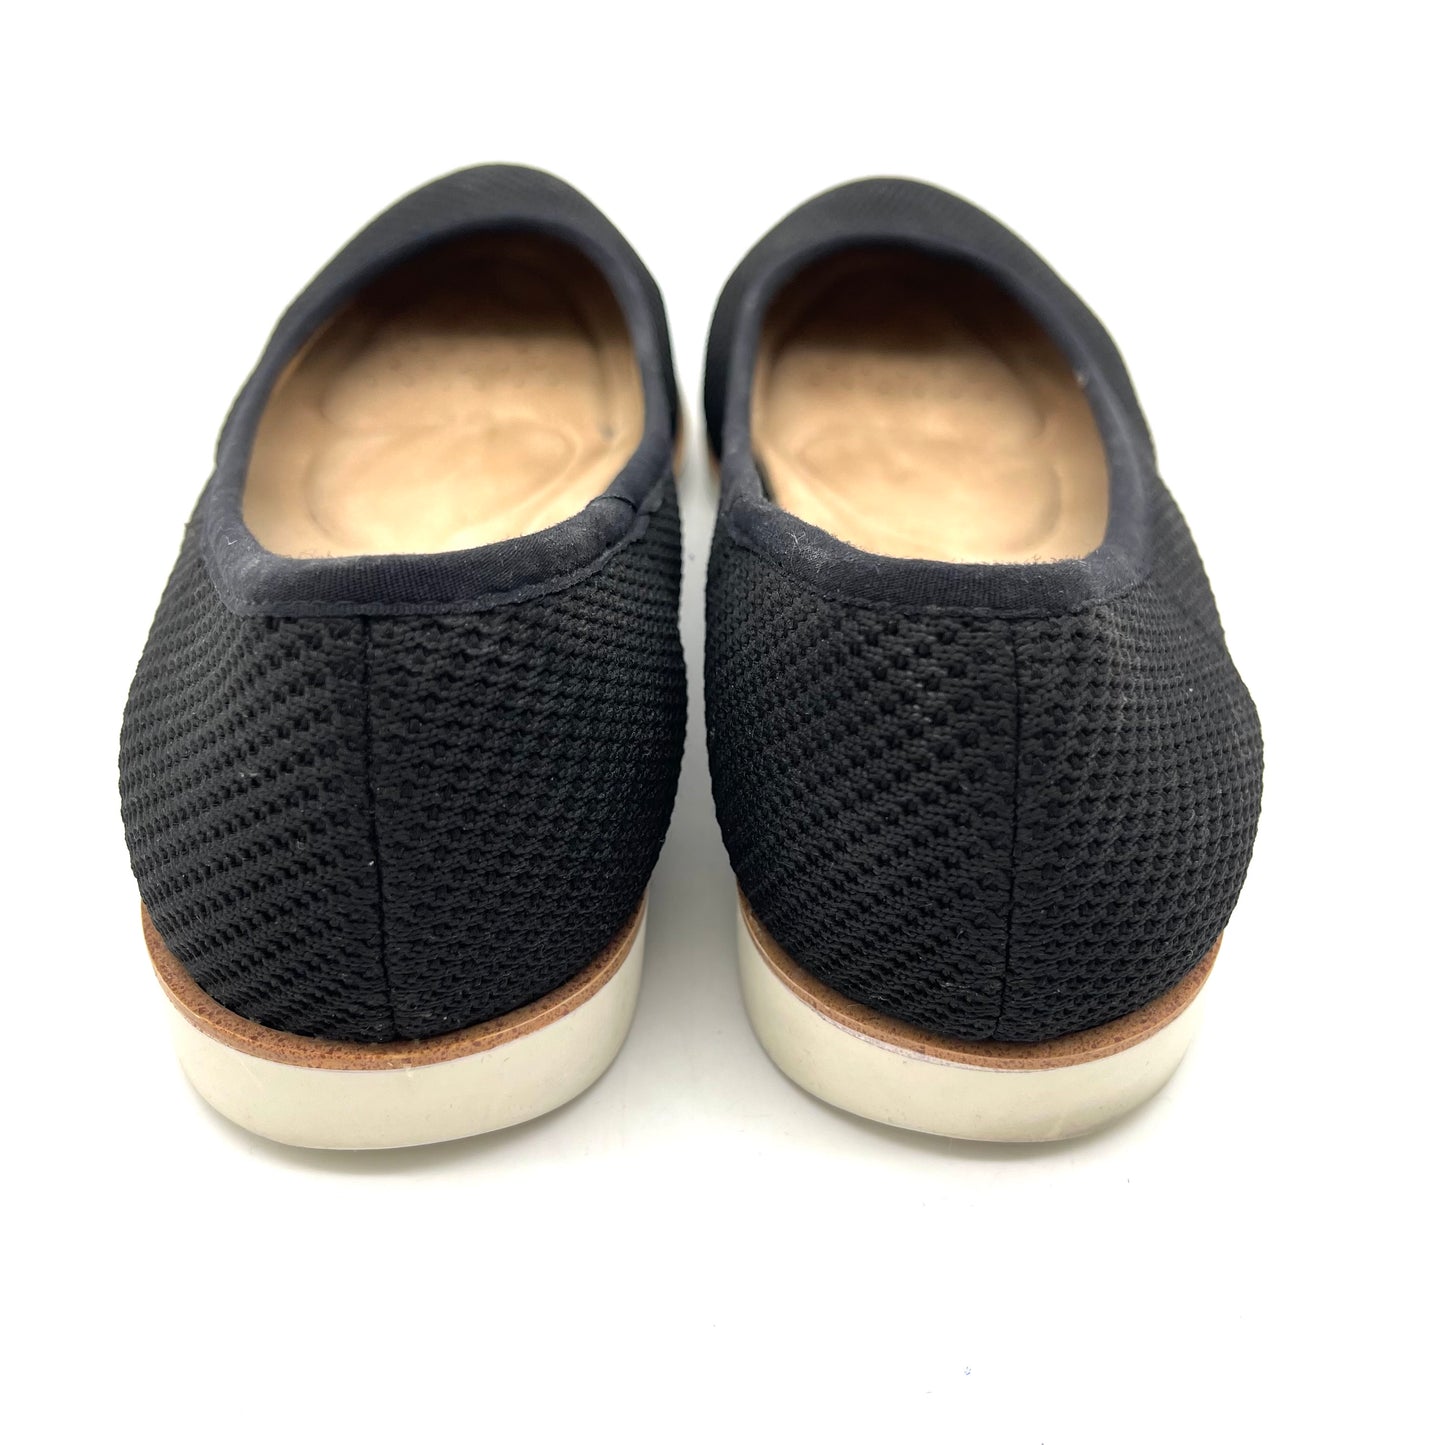 Shoes Flats By ABELLA Size: 7.5